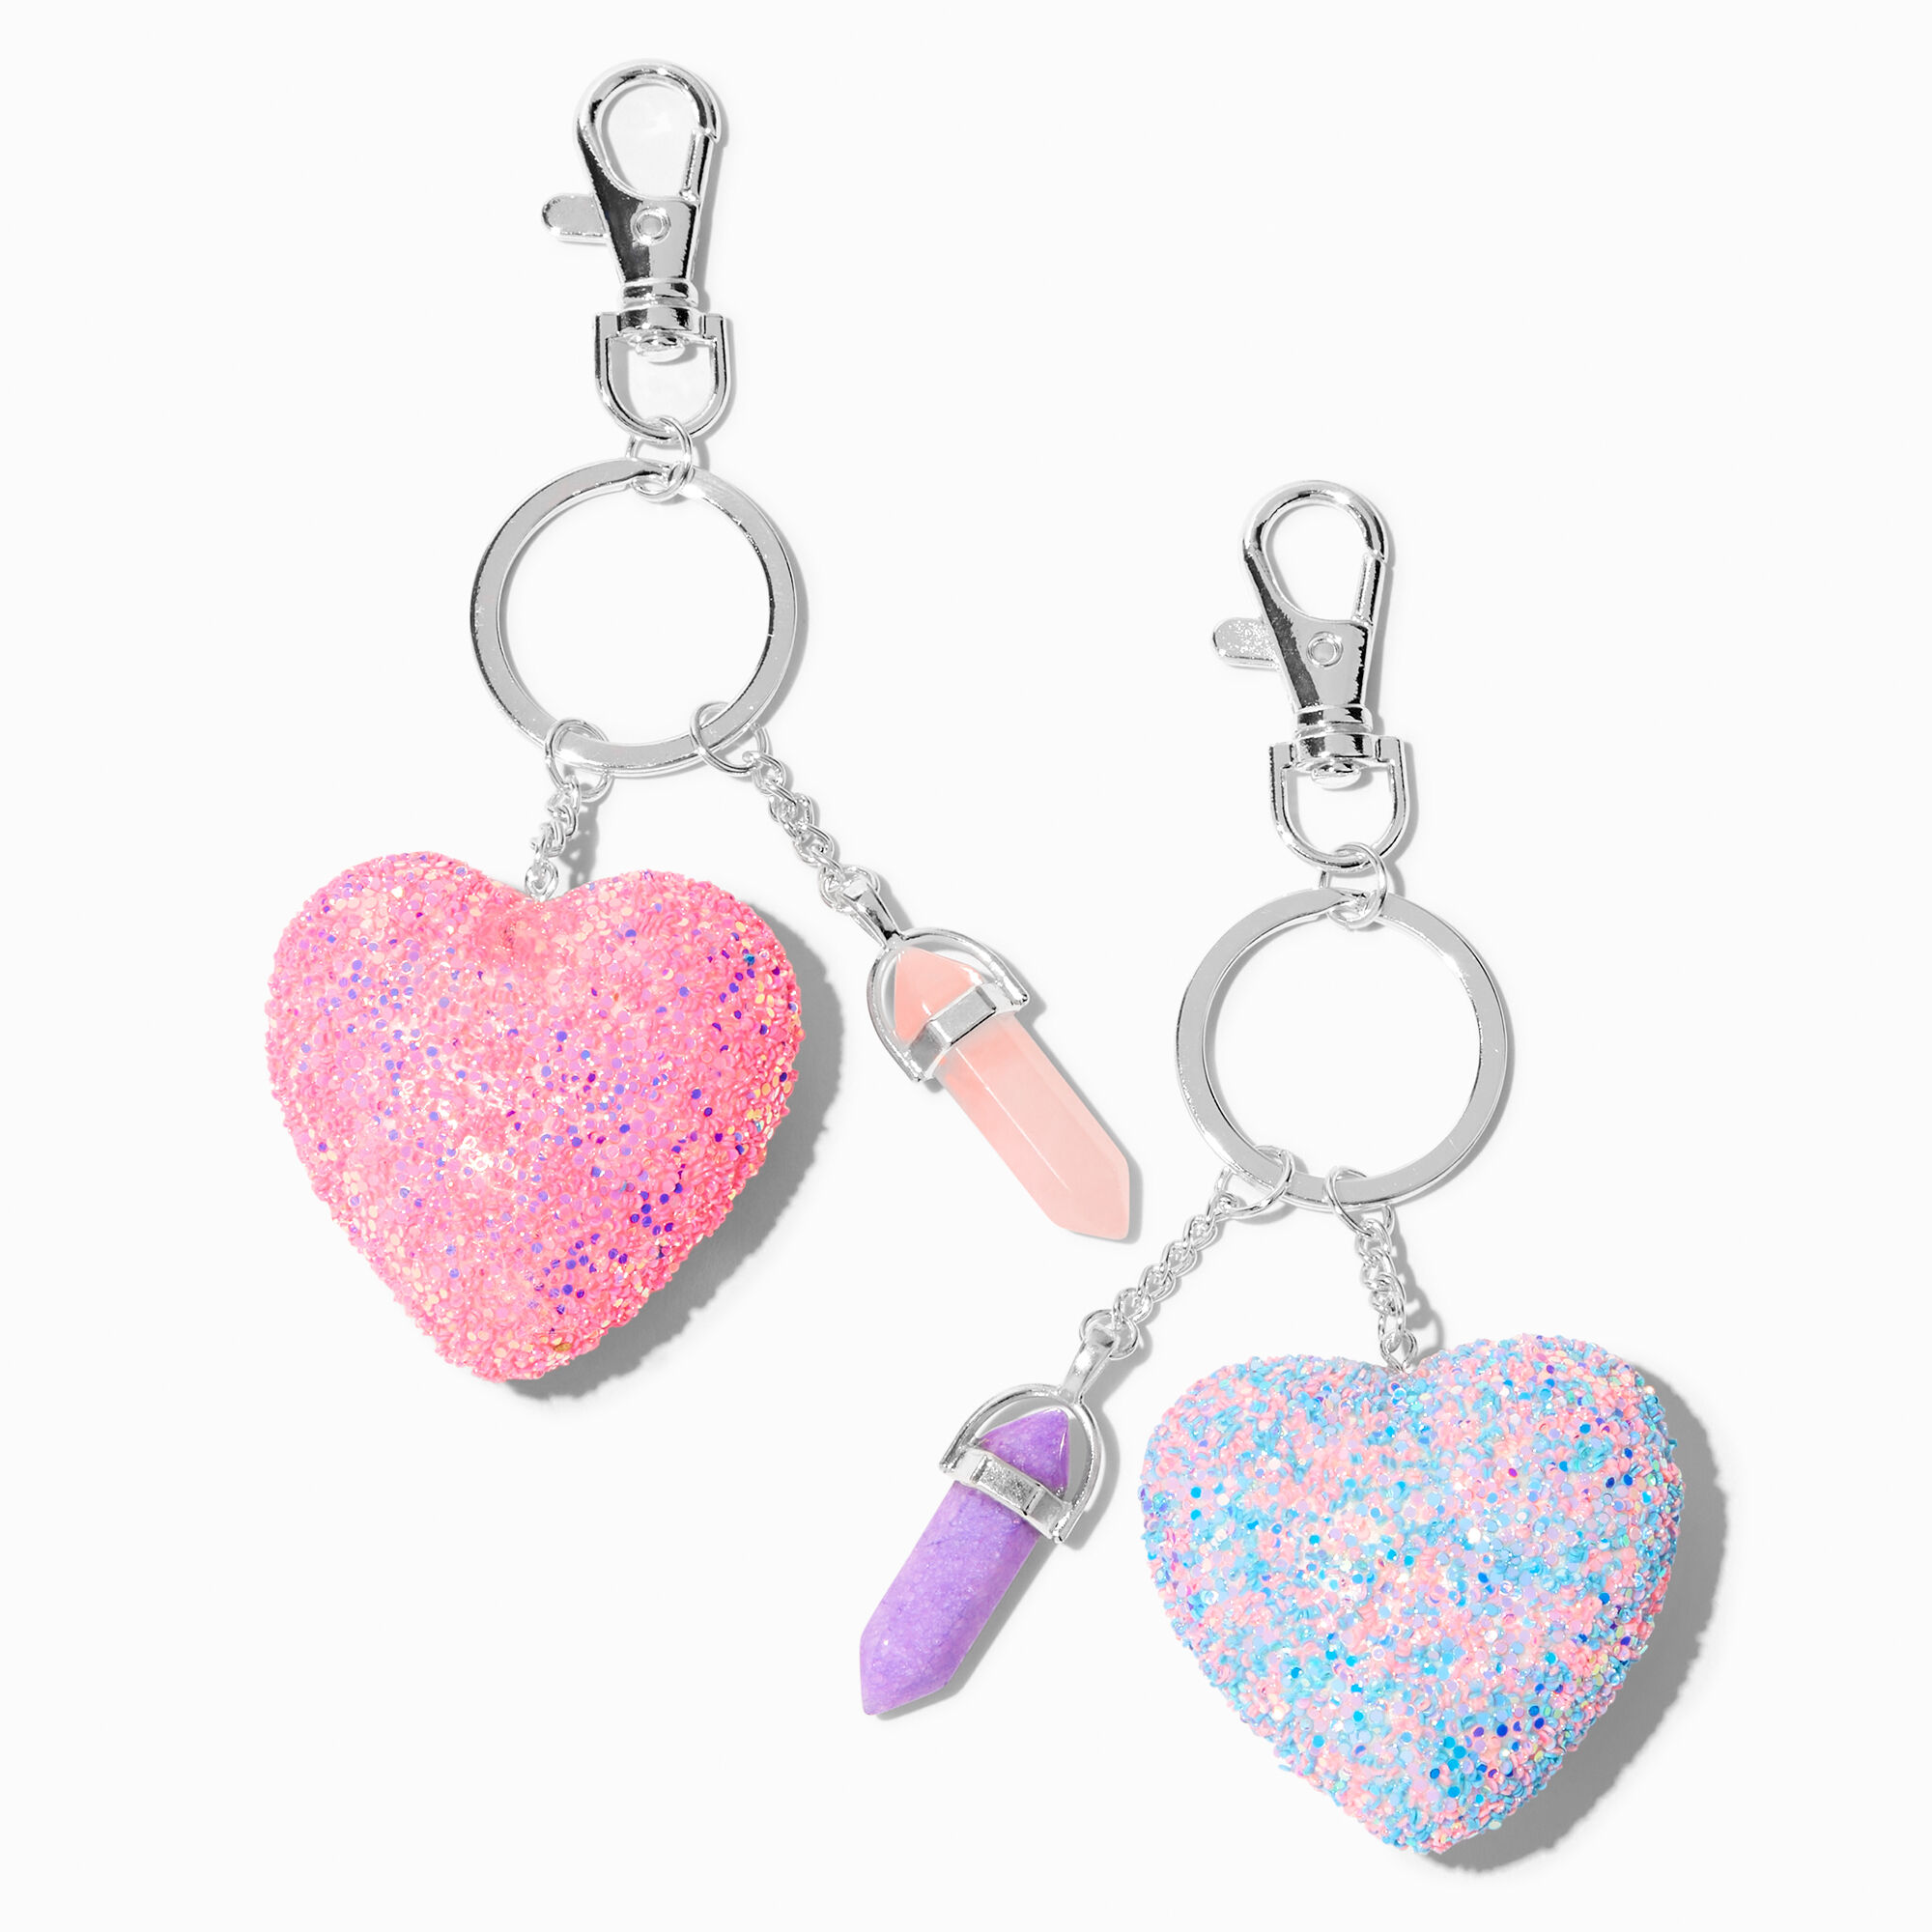 View Claires Best Friends Pastel Confetti Hearts Keyrings 2 Pack Silver information